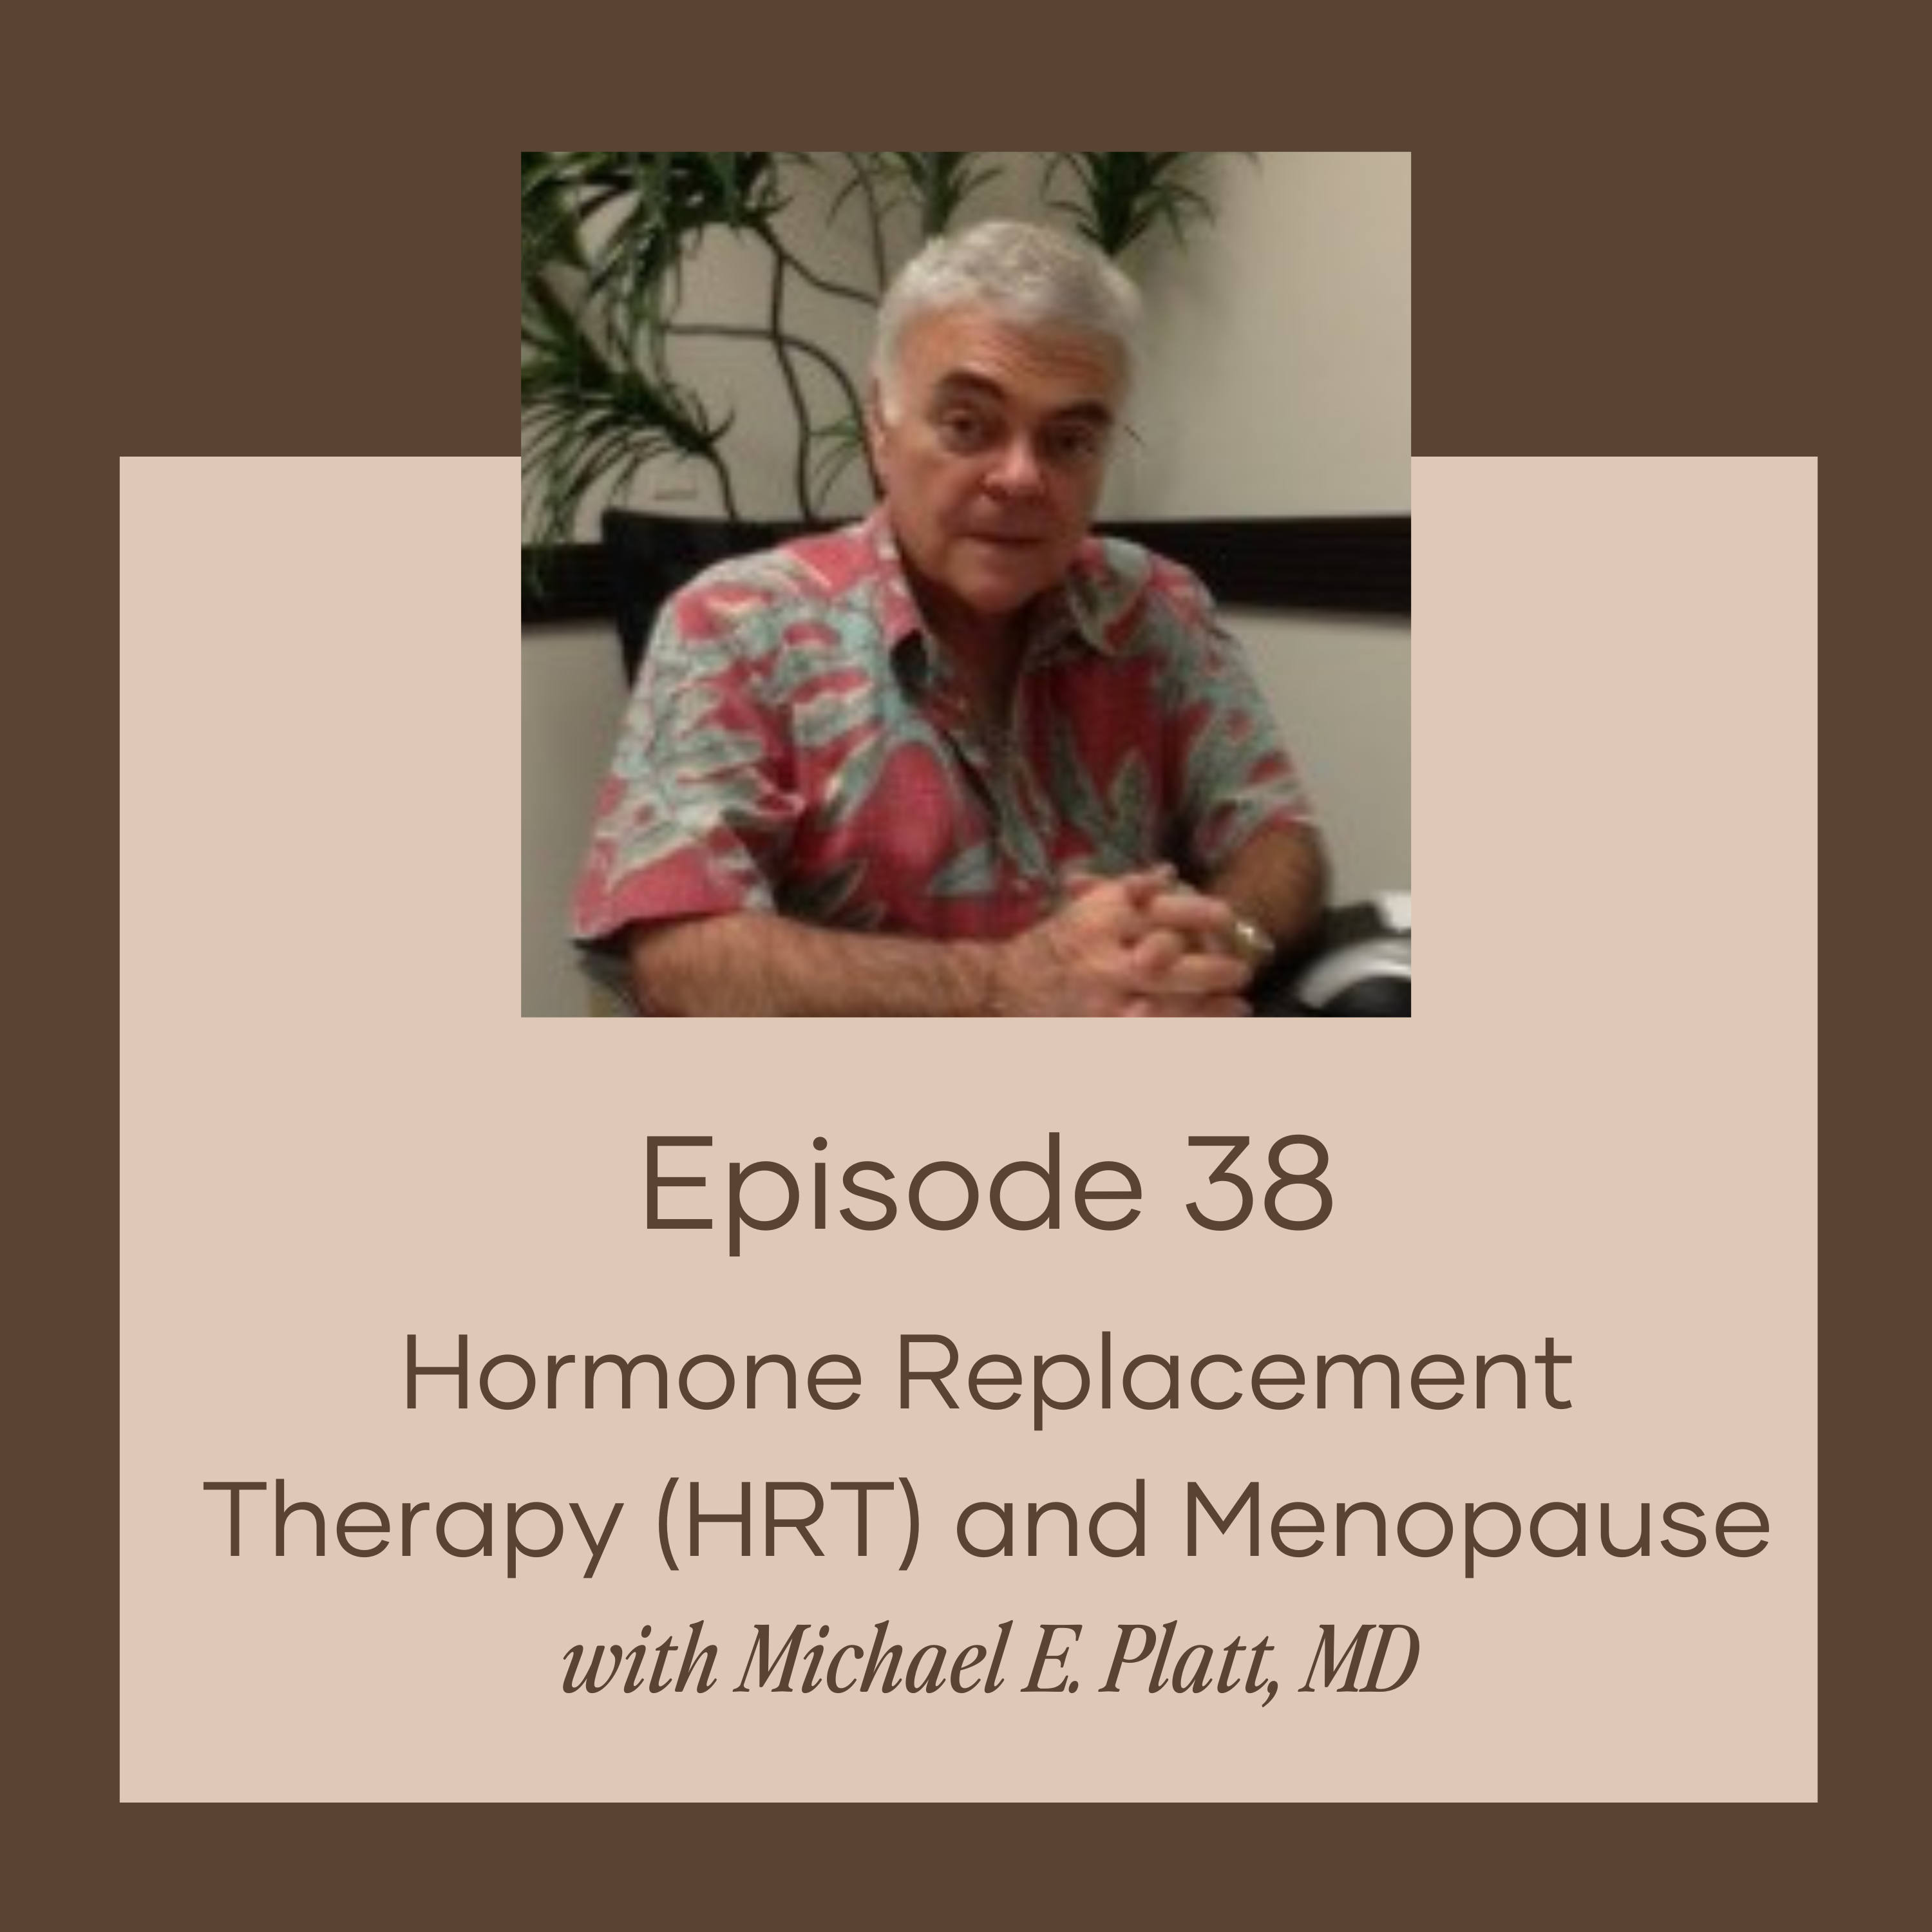 Hormone Replacement Therapy (HRT) and Menopause w/ Michael E. Platt, MD